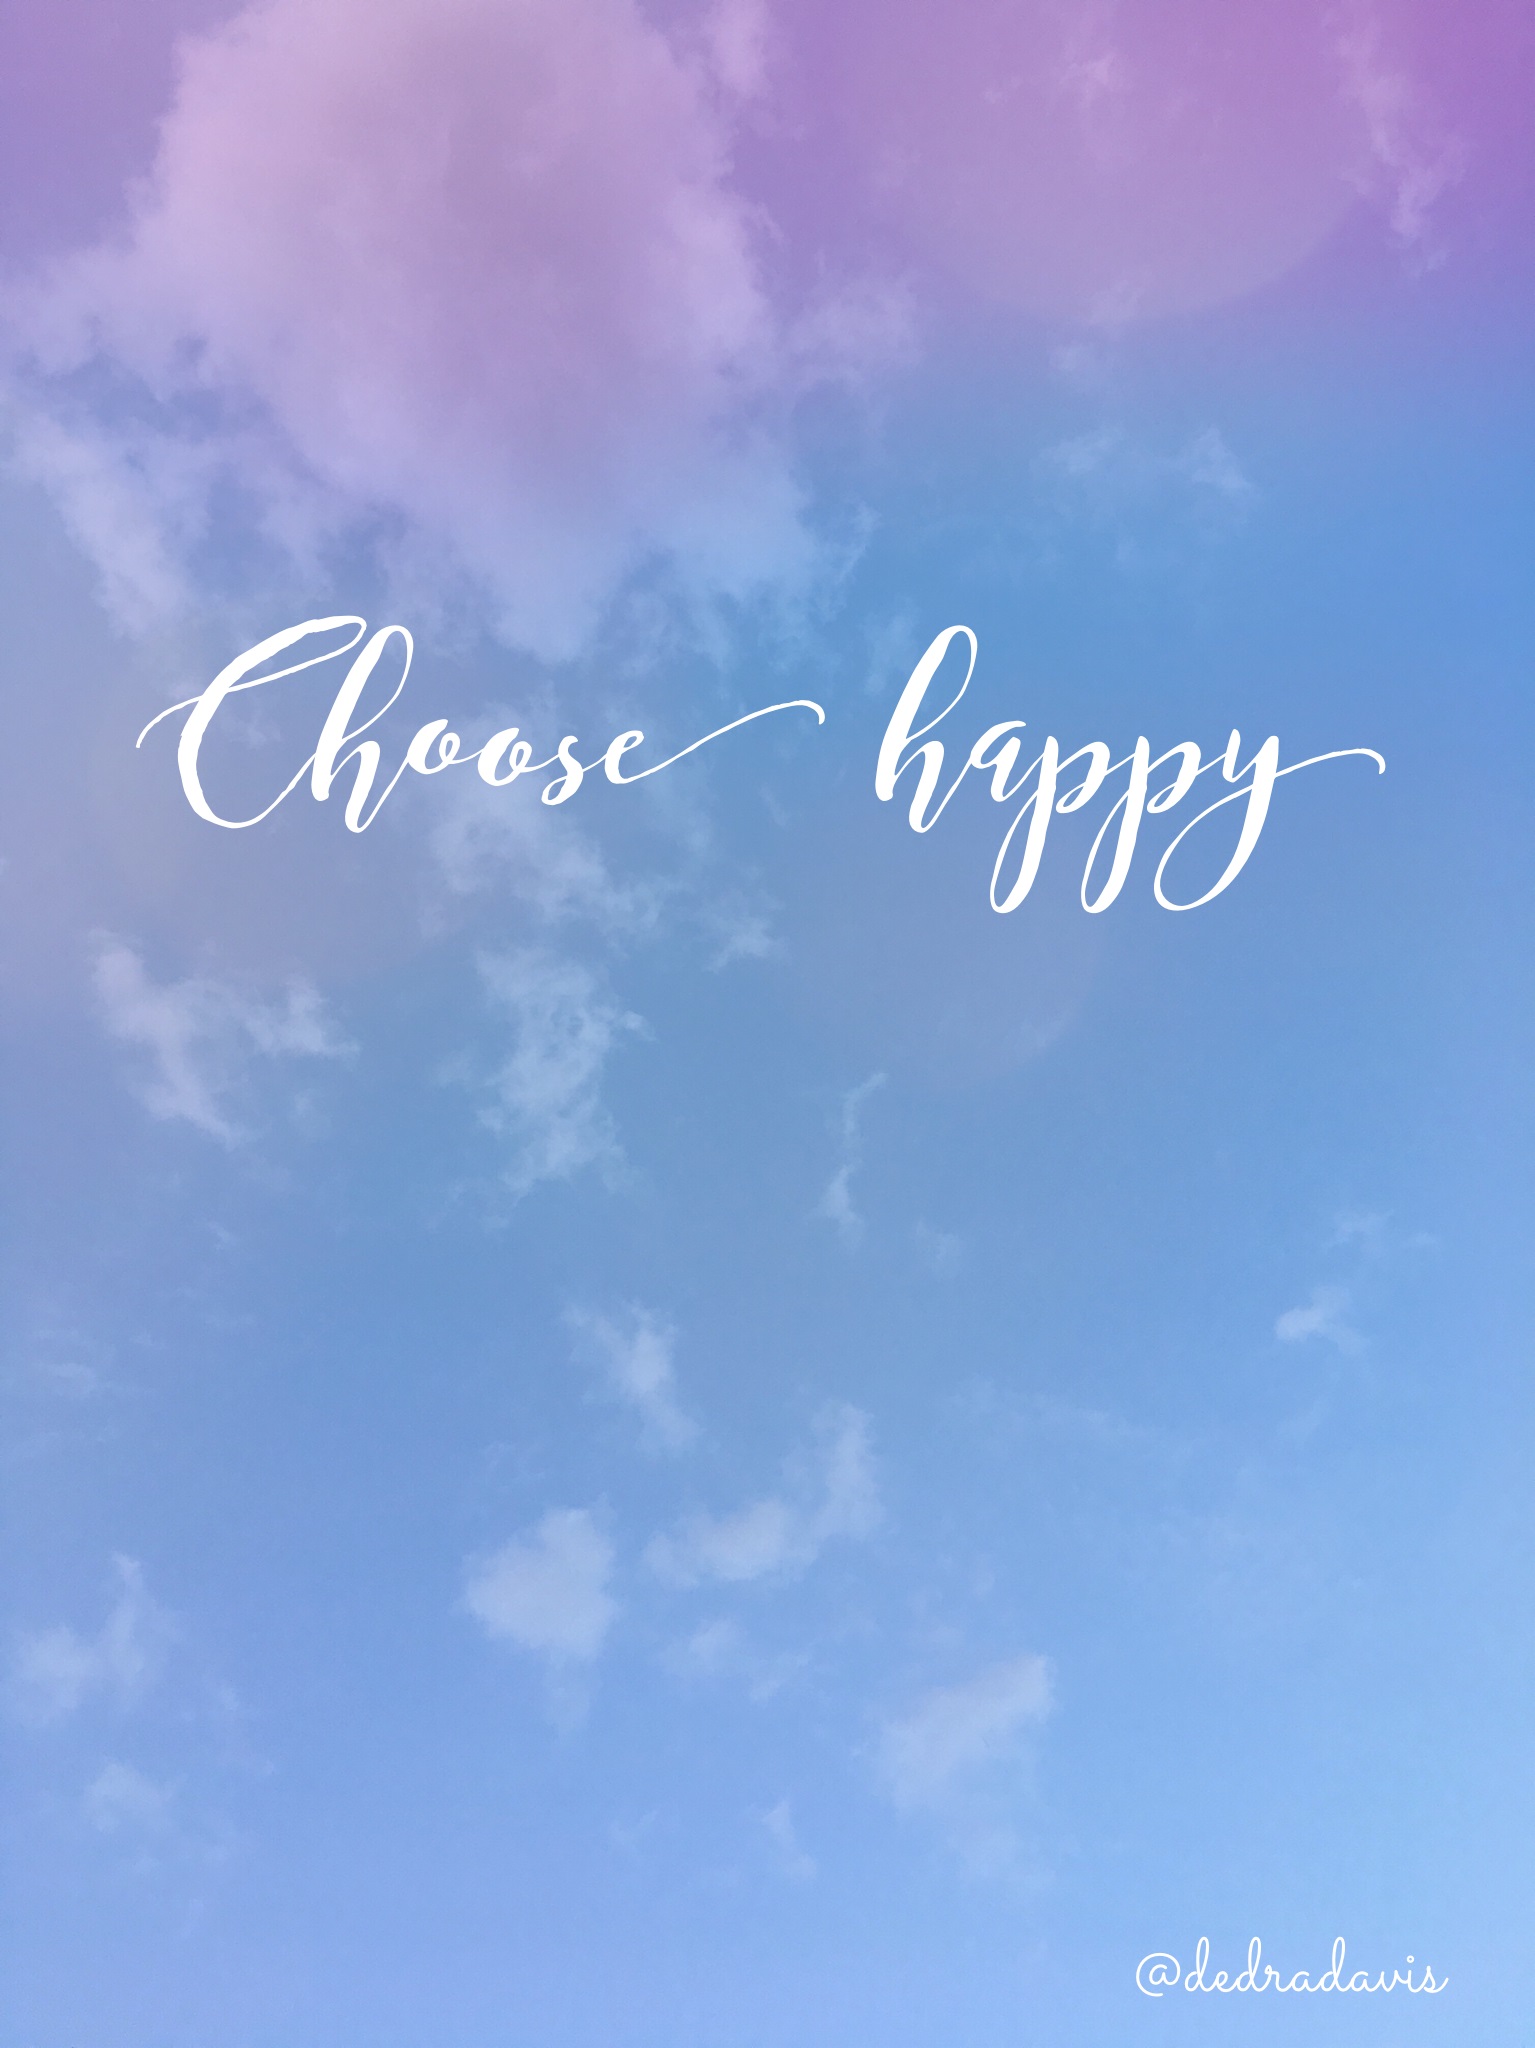 Being grateful and choosing happy; two qualities that can help you make ...